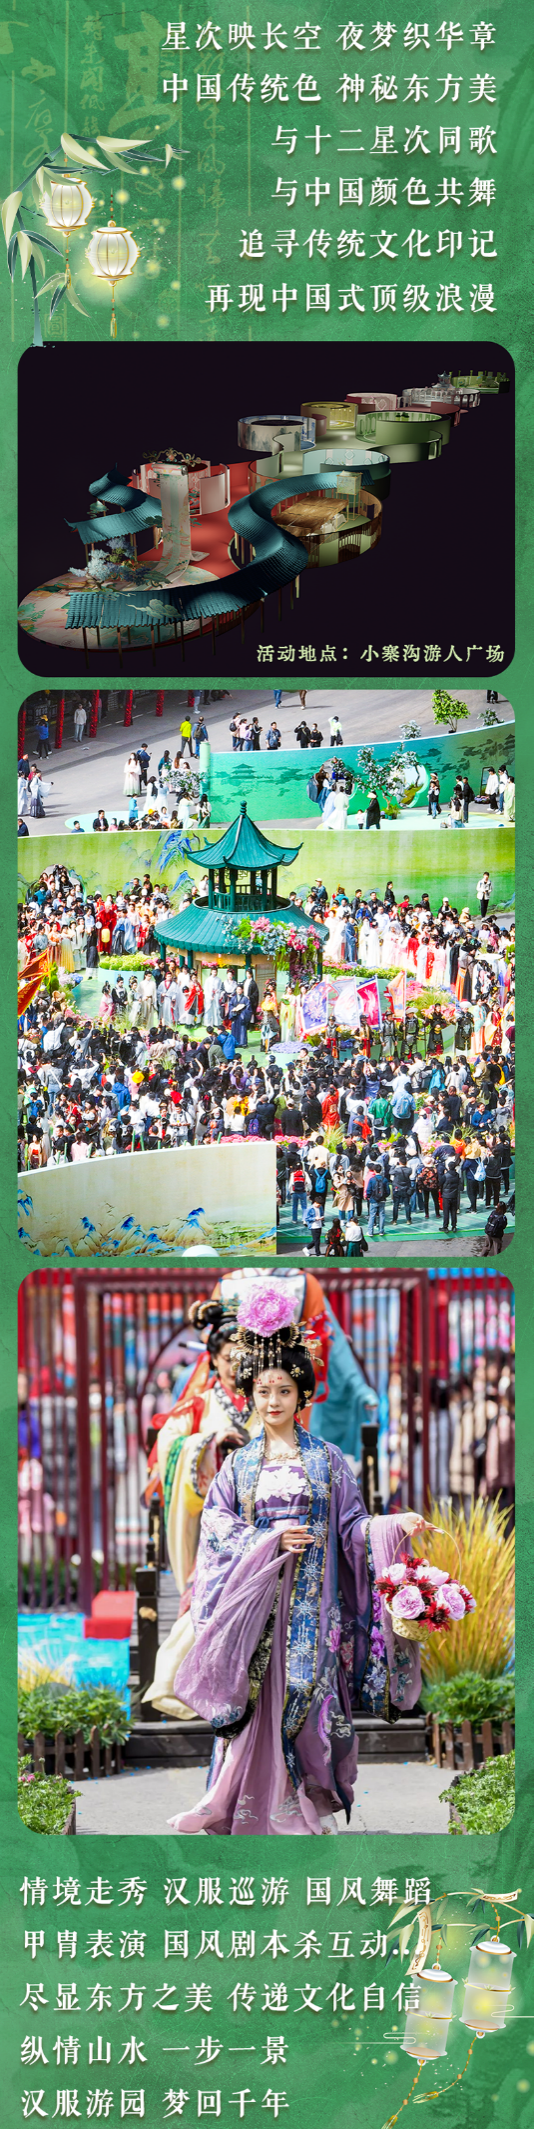 Official Announcement! The Sixth Yuntaishan Hanfu Huazhao Festival to Grandly Open on March 23rd!